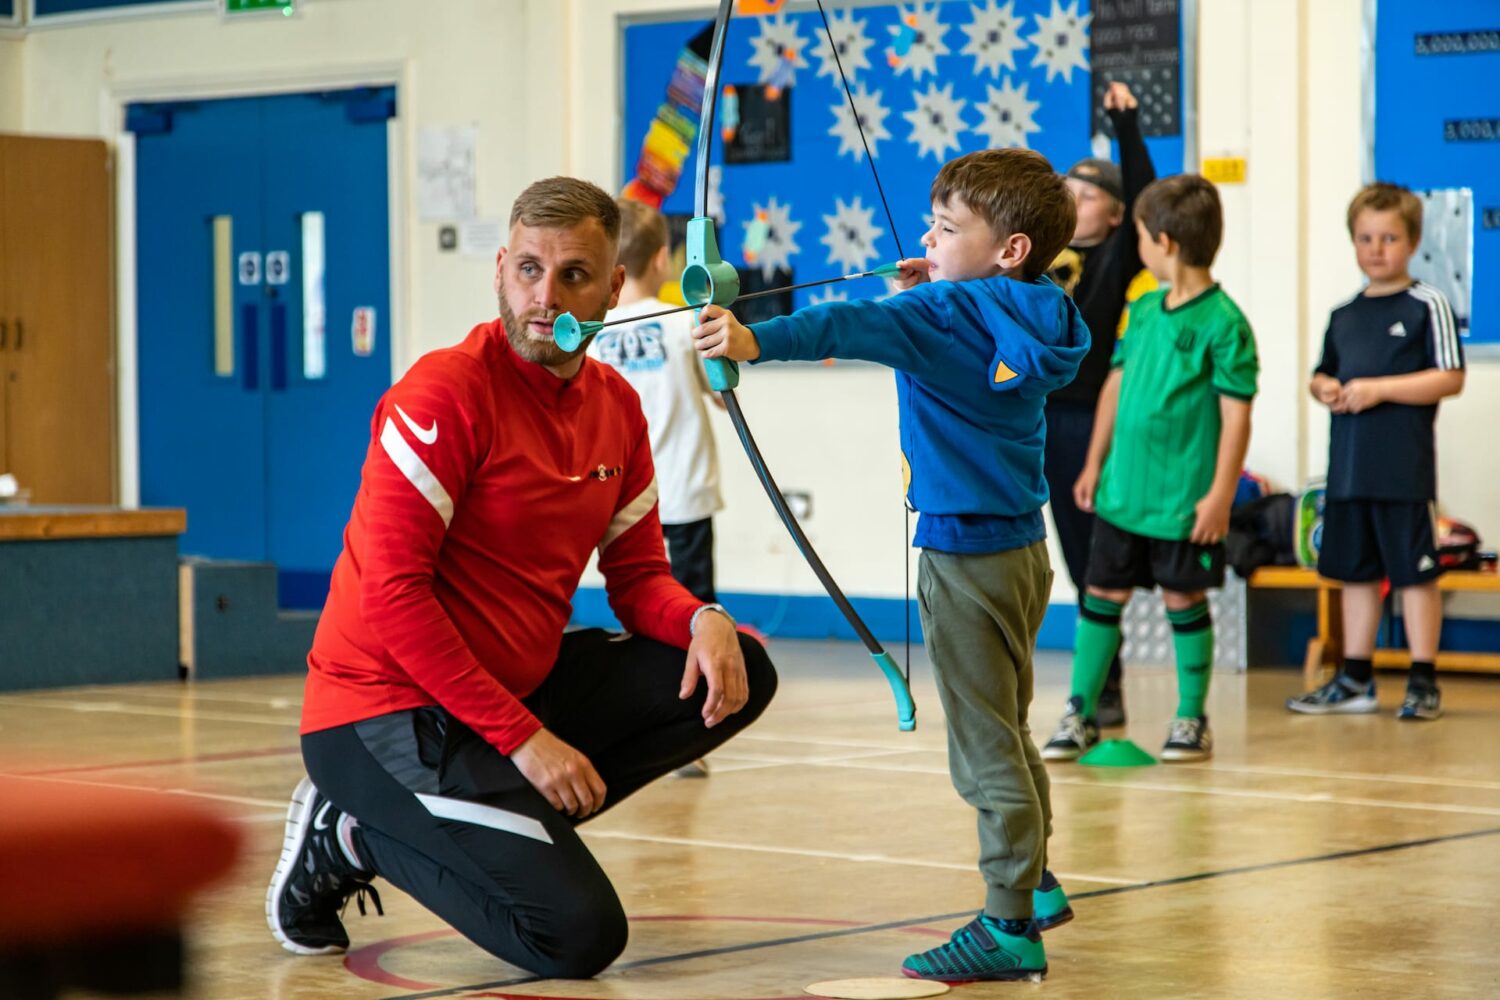 time4sport educator with child holding bow and arrow for Archery